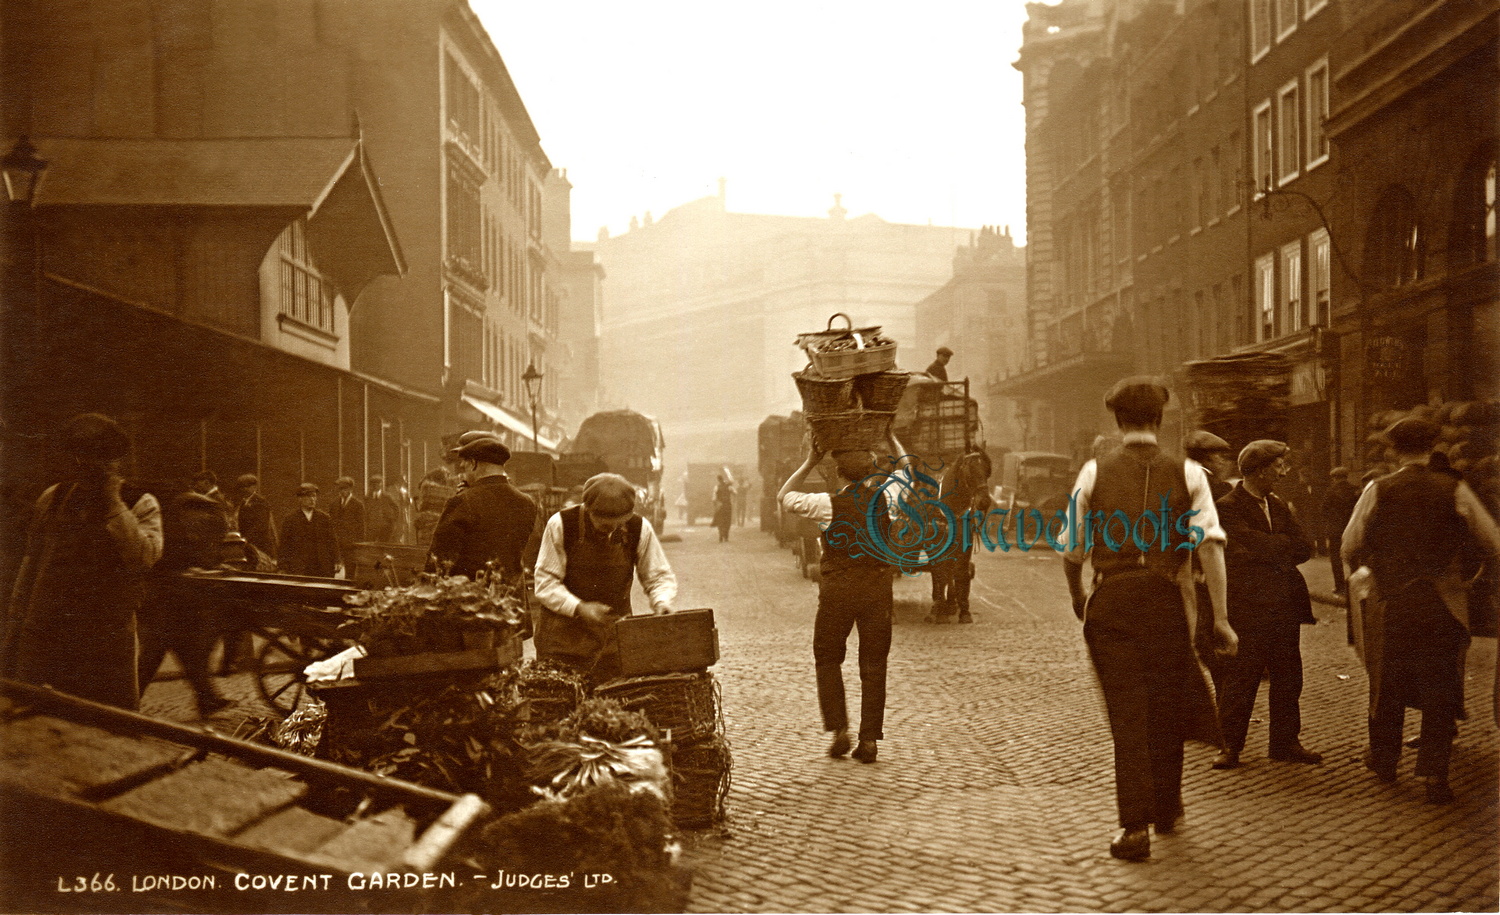  old  Social history photos of Covent Garden, London - click image below to return